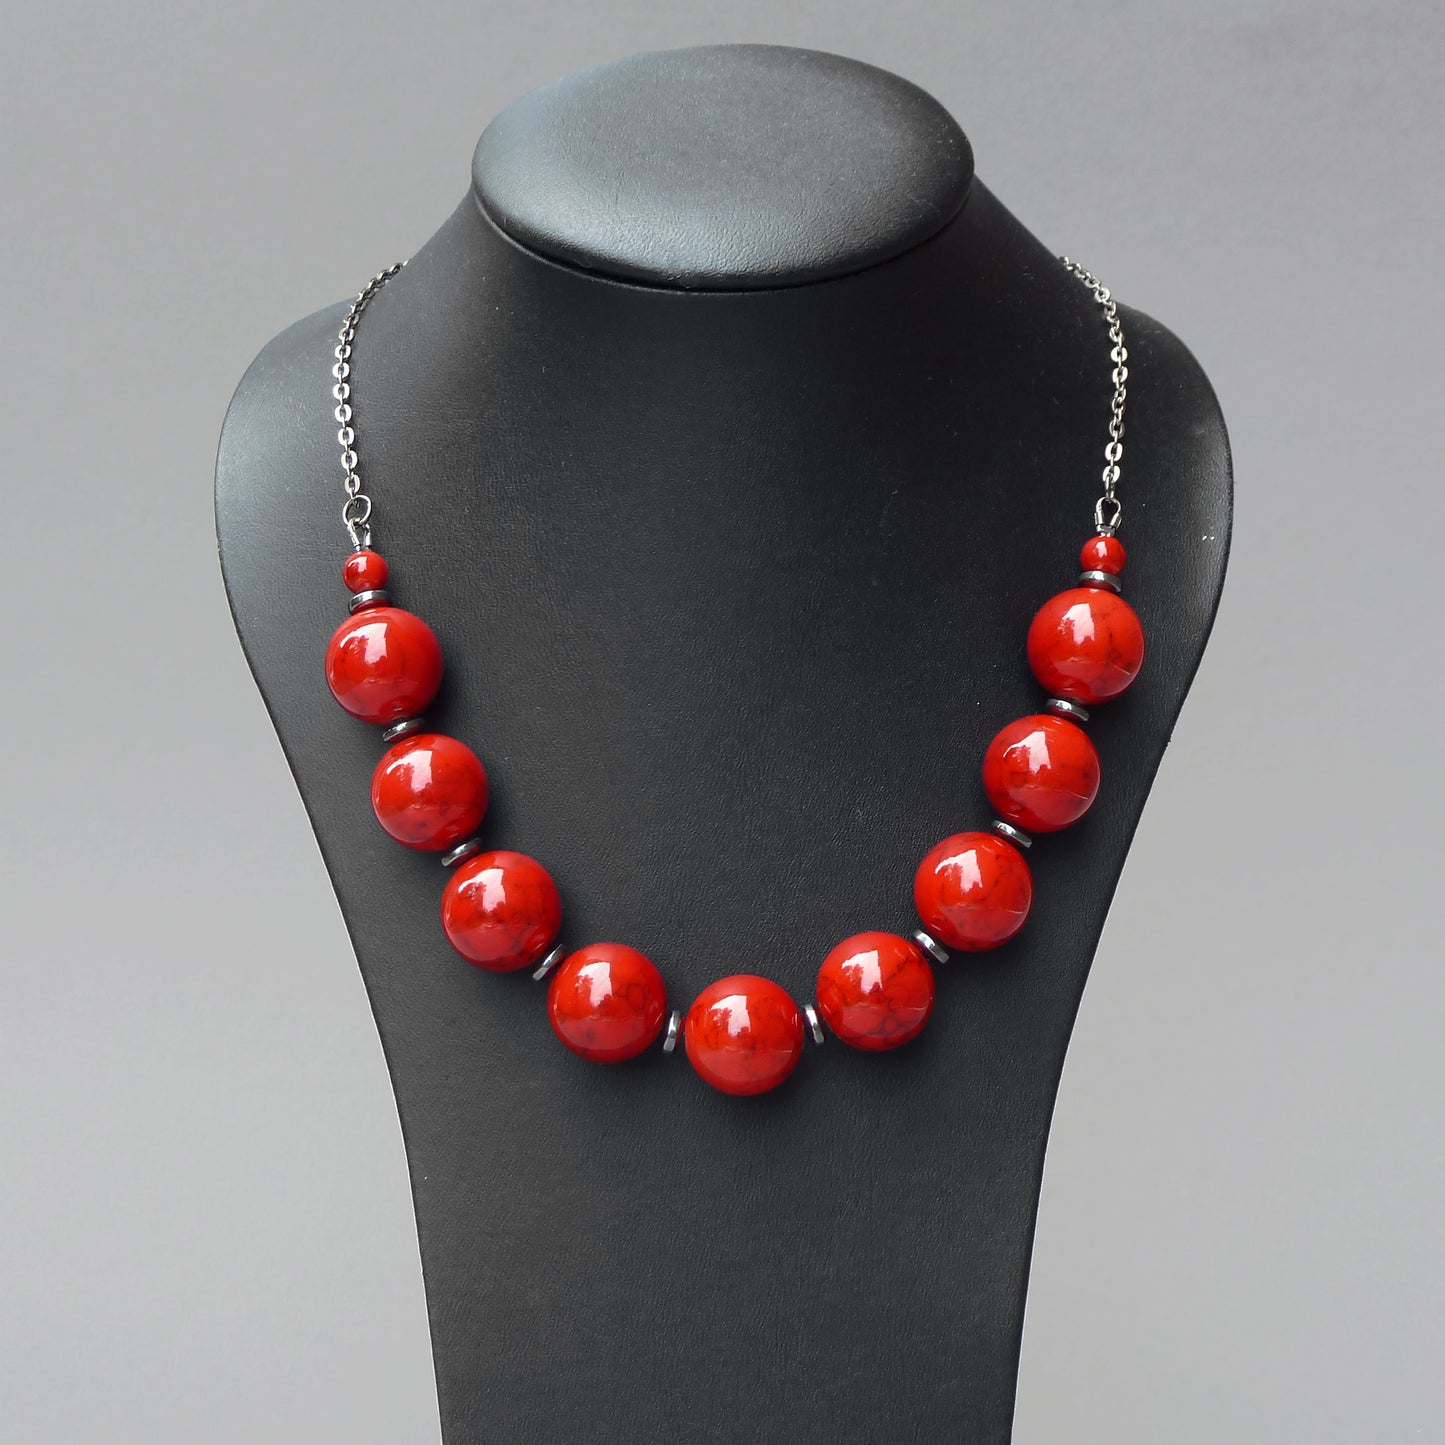 Chunky bright red necklace